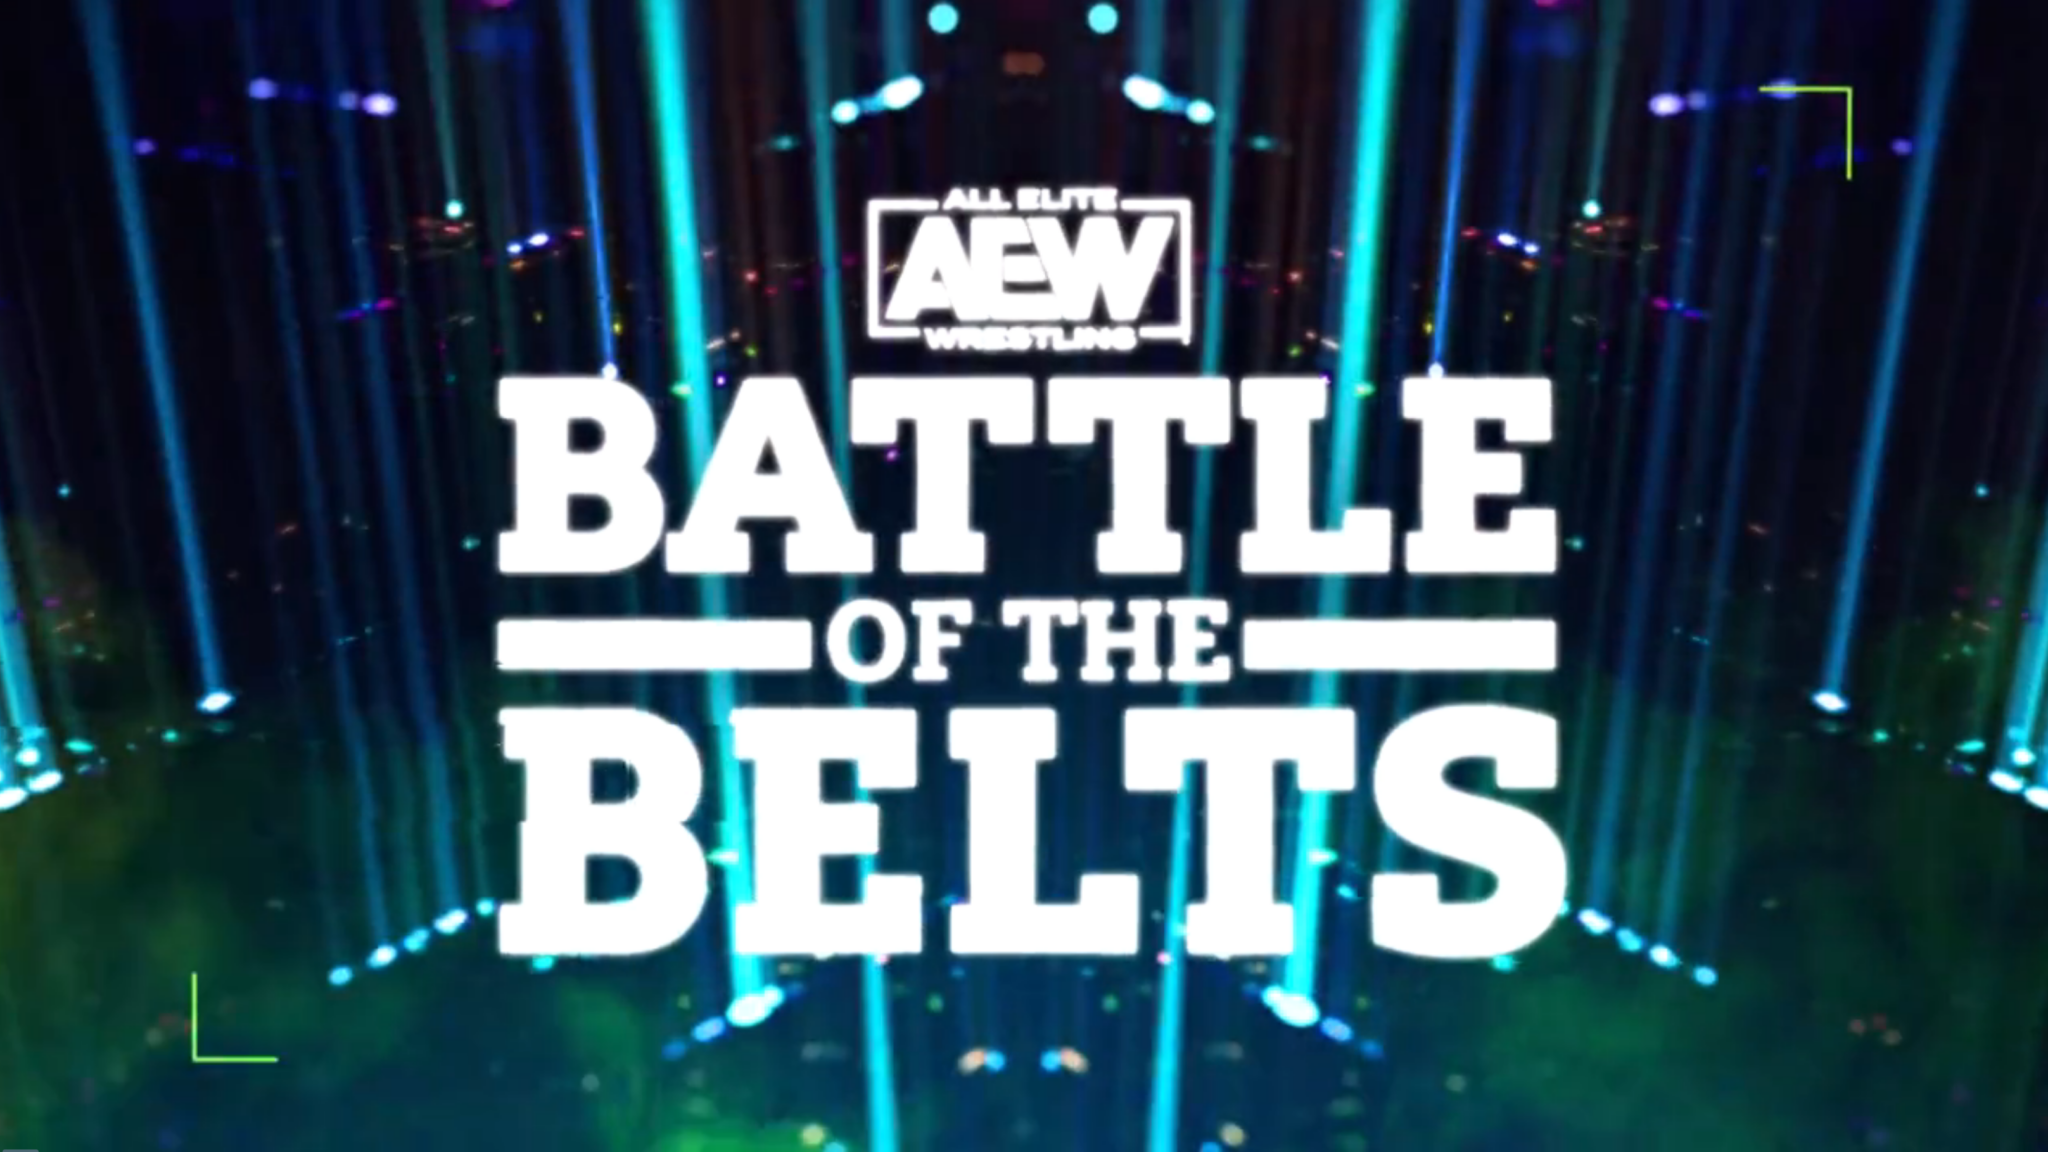 Two More Title Matches Made Official For AEW's Battle Of The Belts V